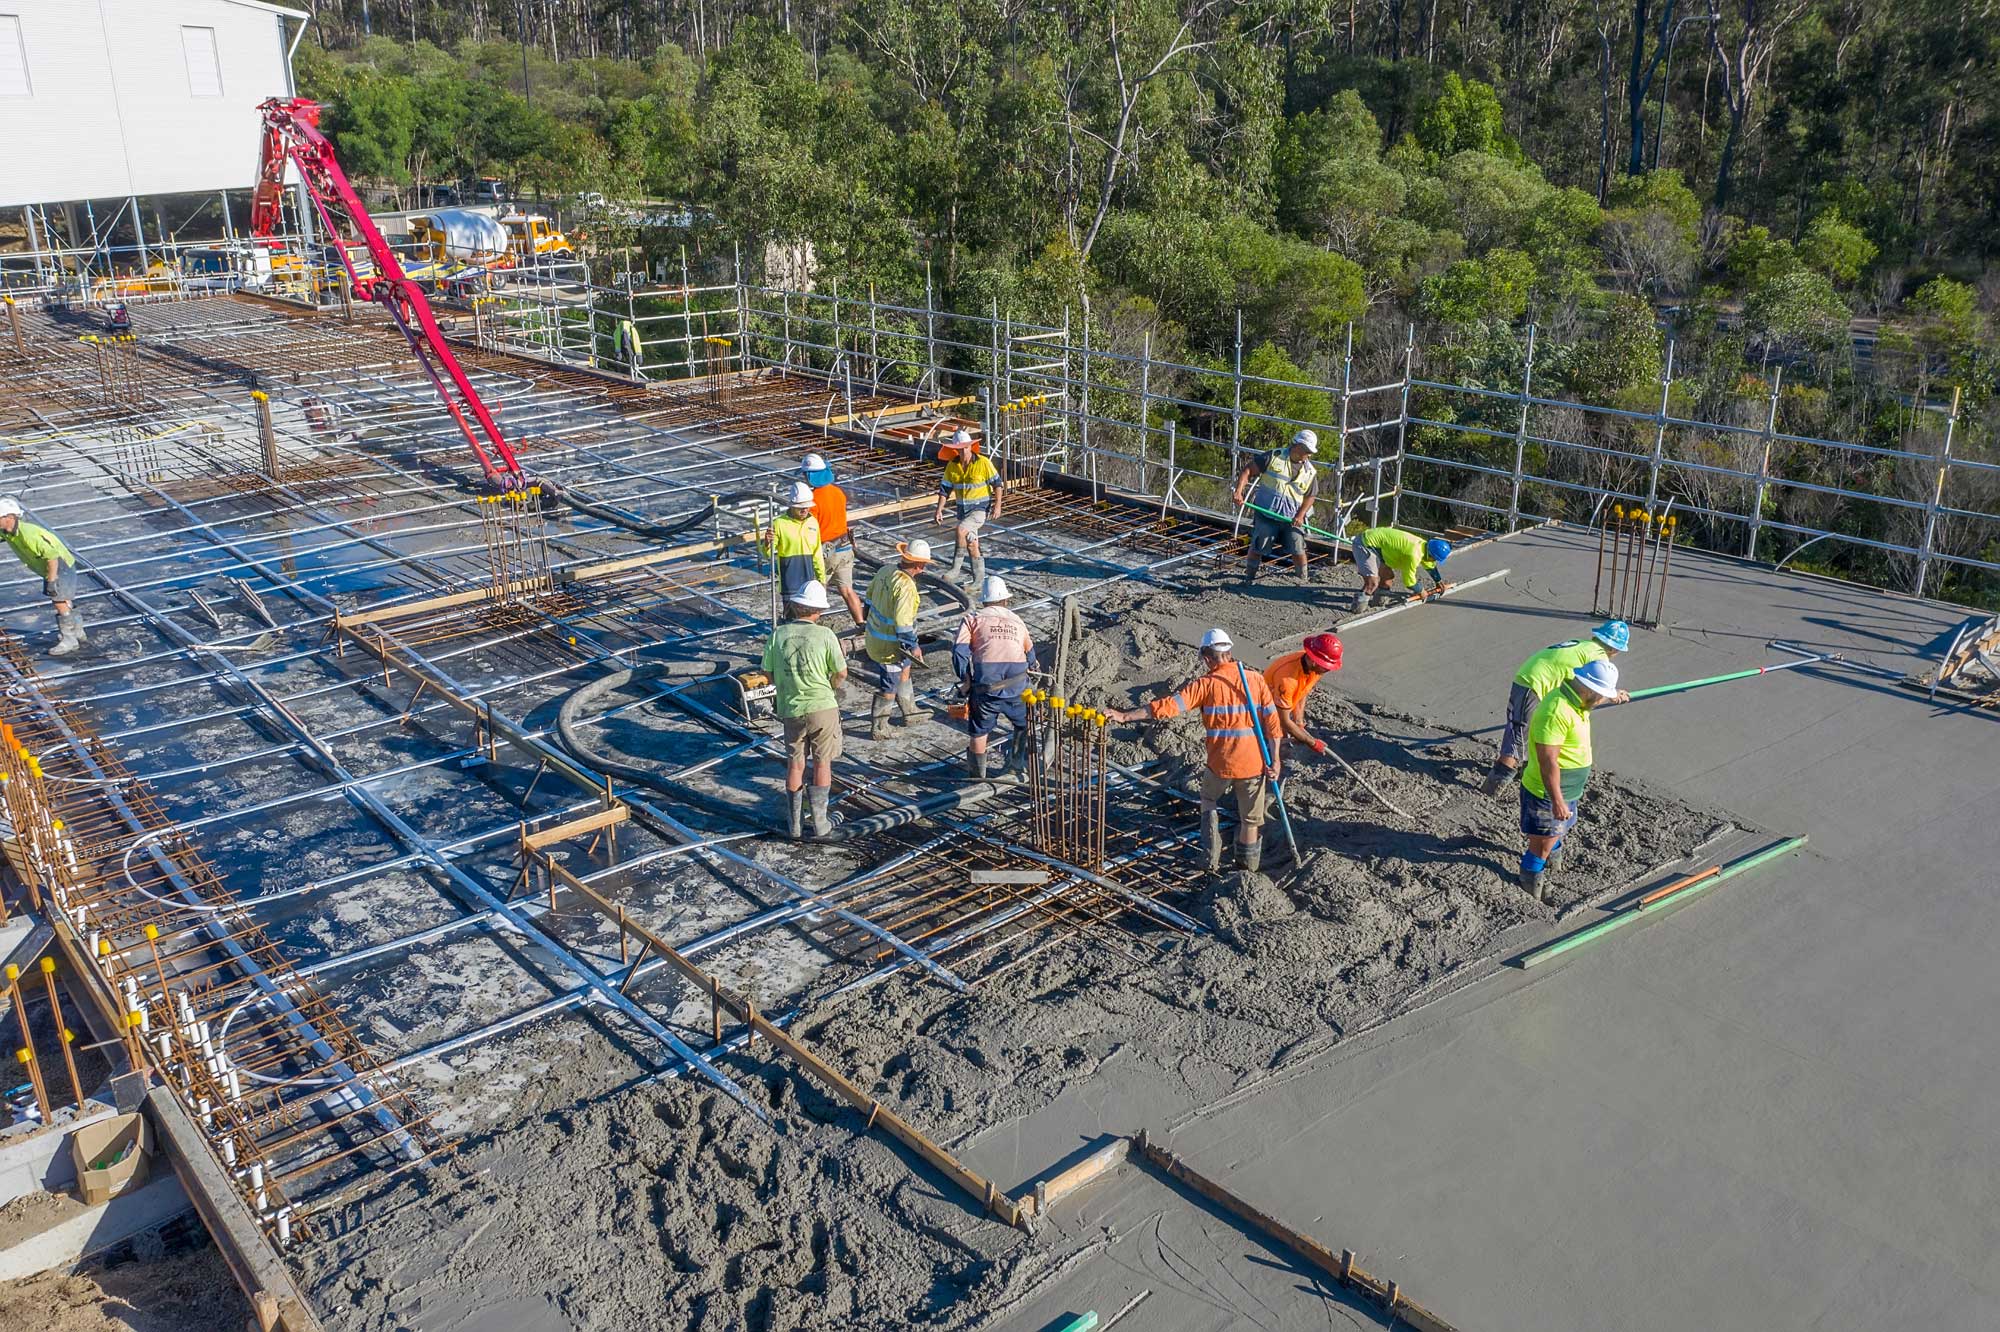 Using the Mavic2Pro drone to photograph construction site "works in progress"  - here the drone flies over the wet cement